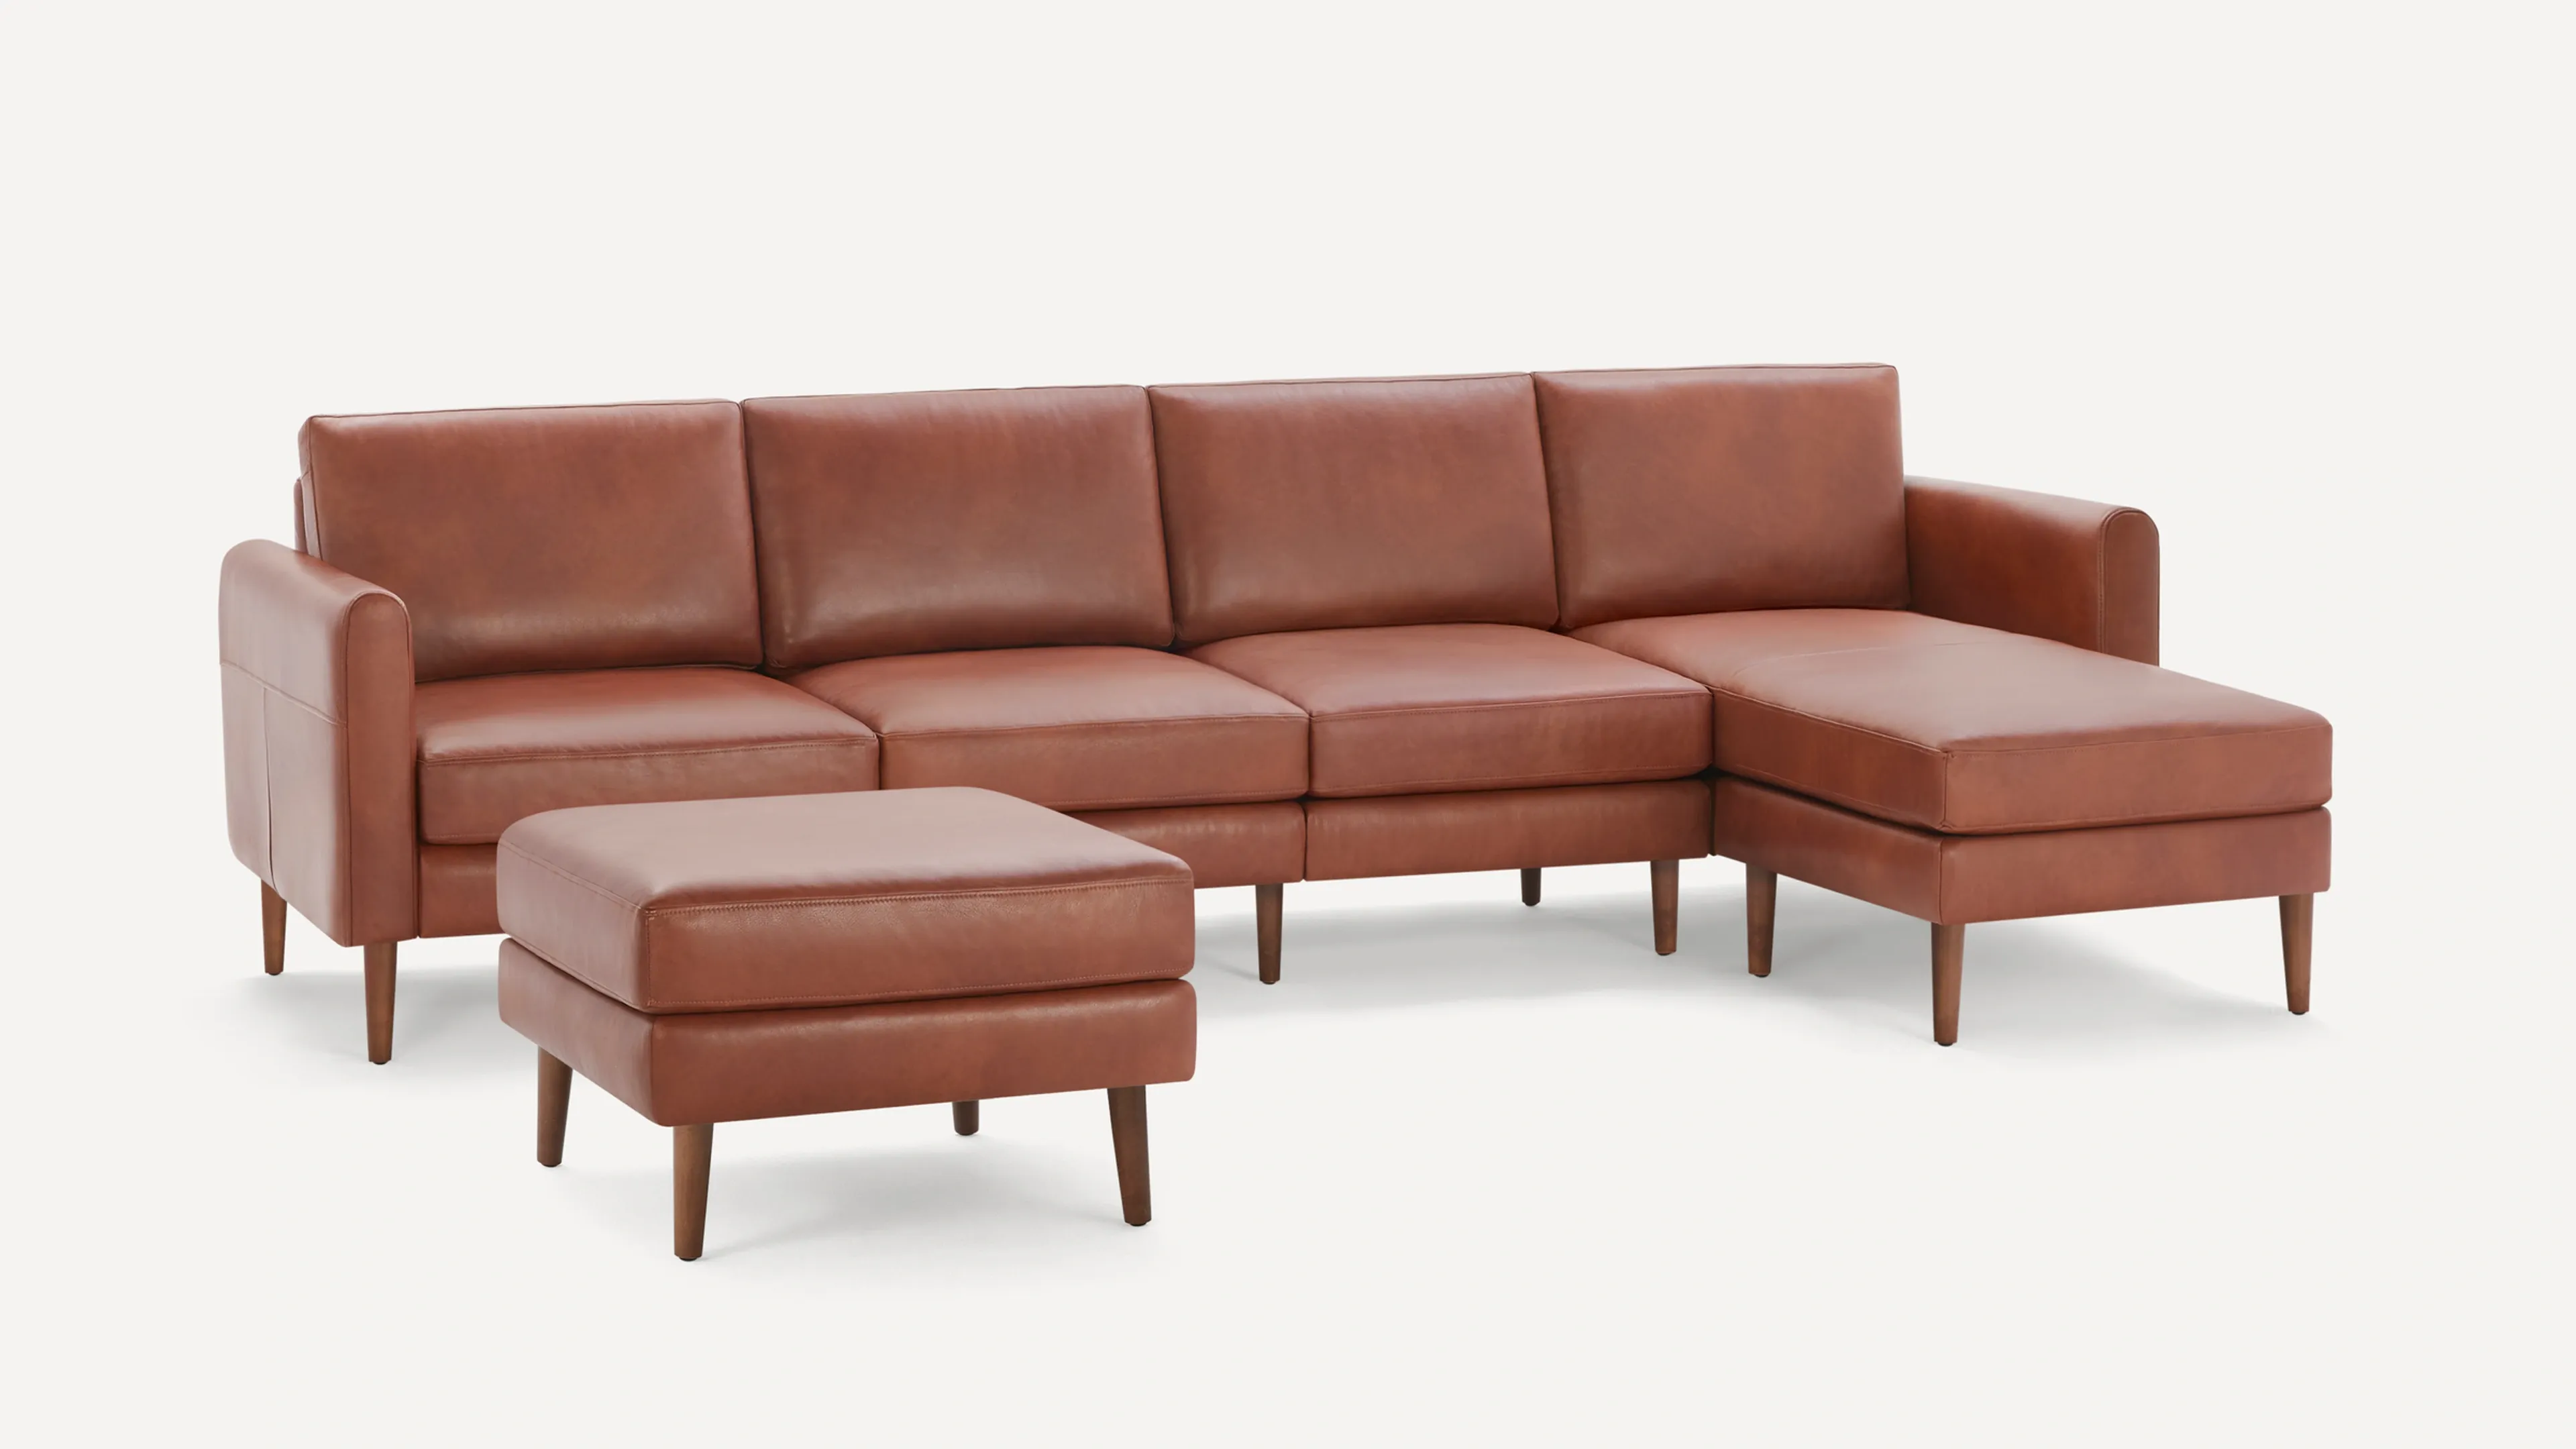 Original Nomad Chaise King Sofa in Chestnut Leather